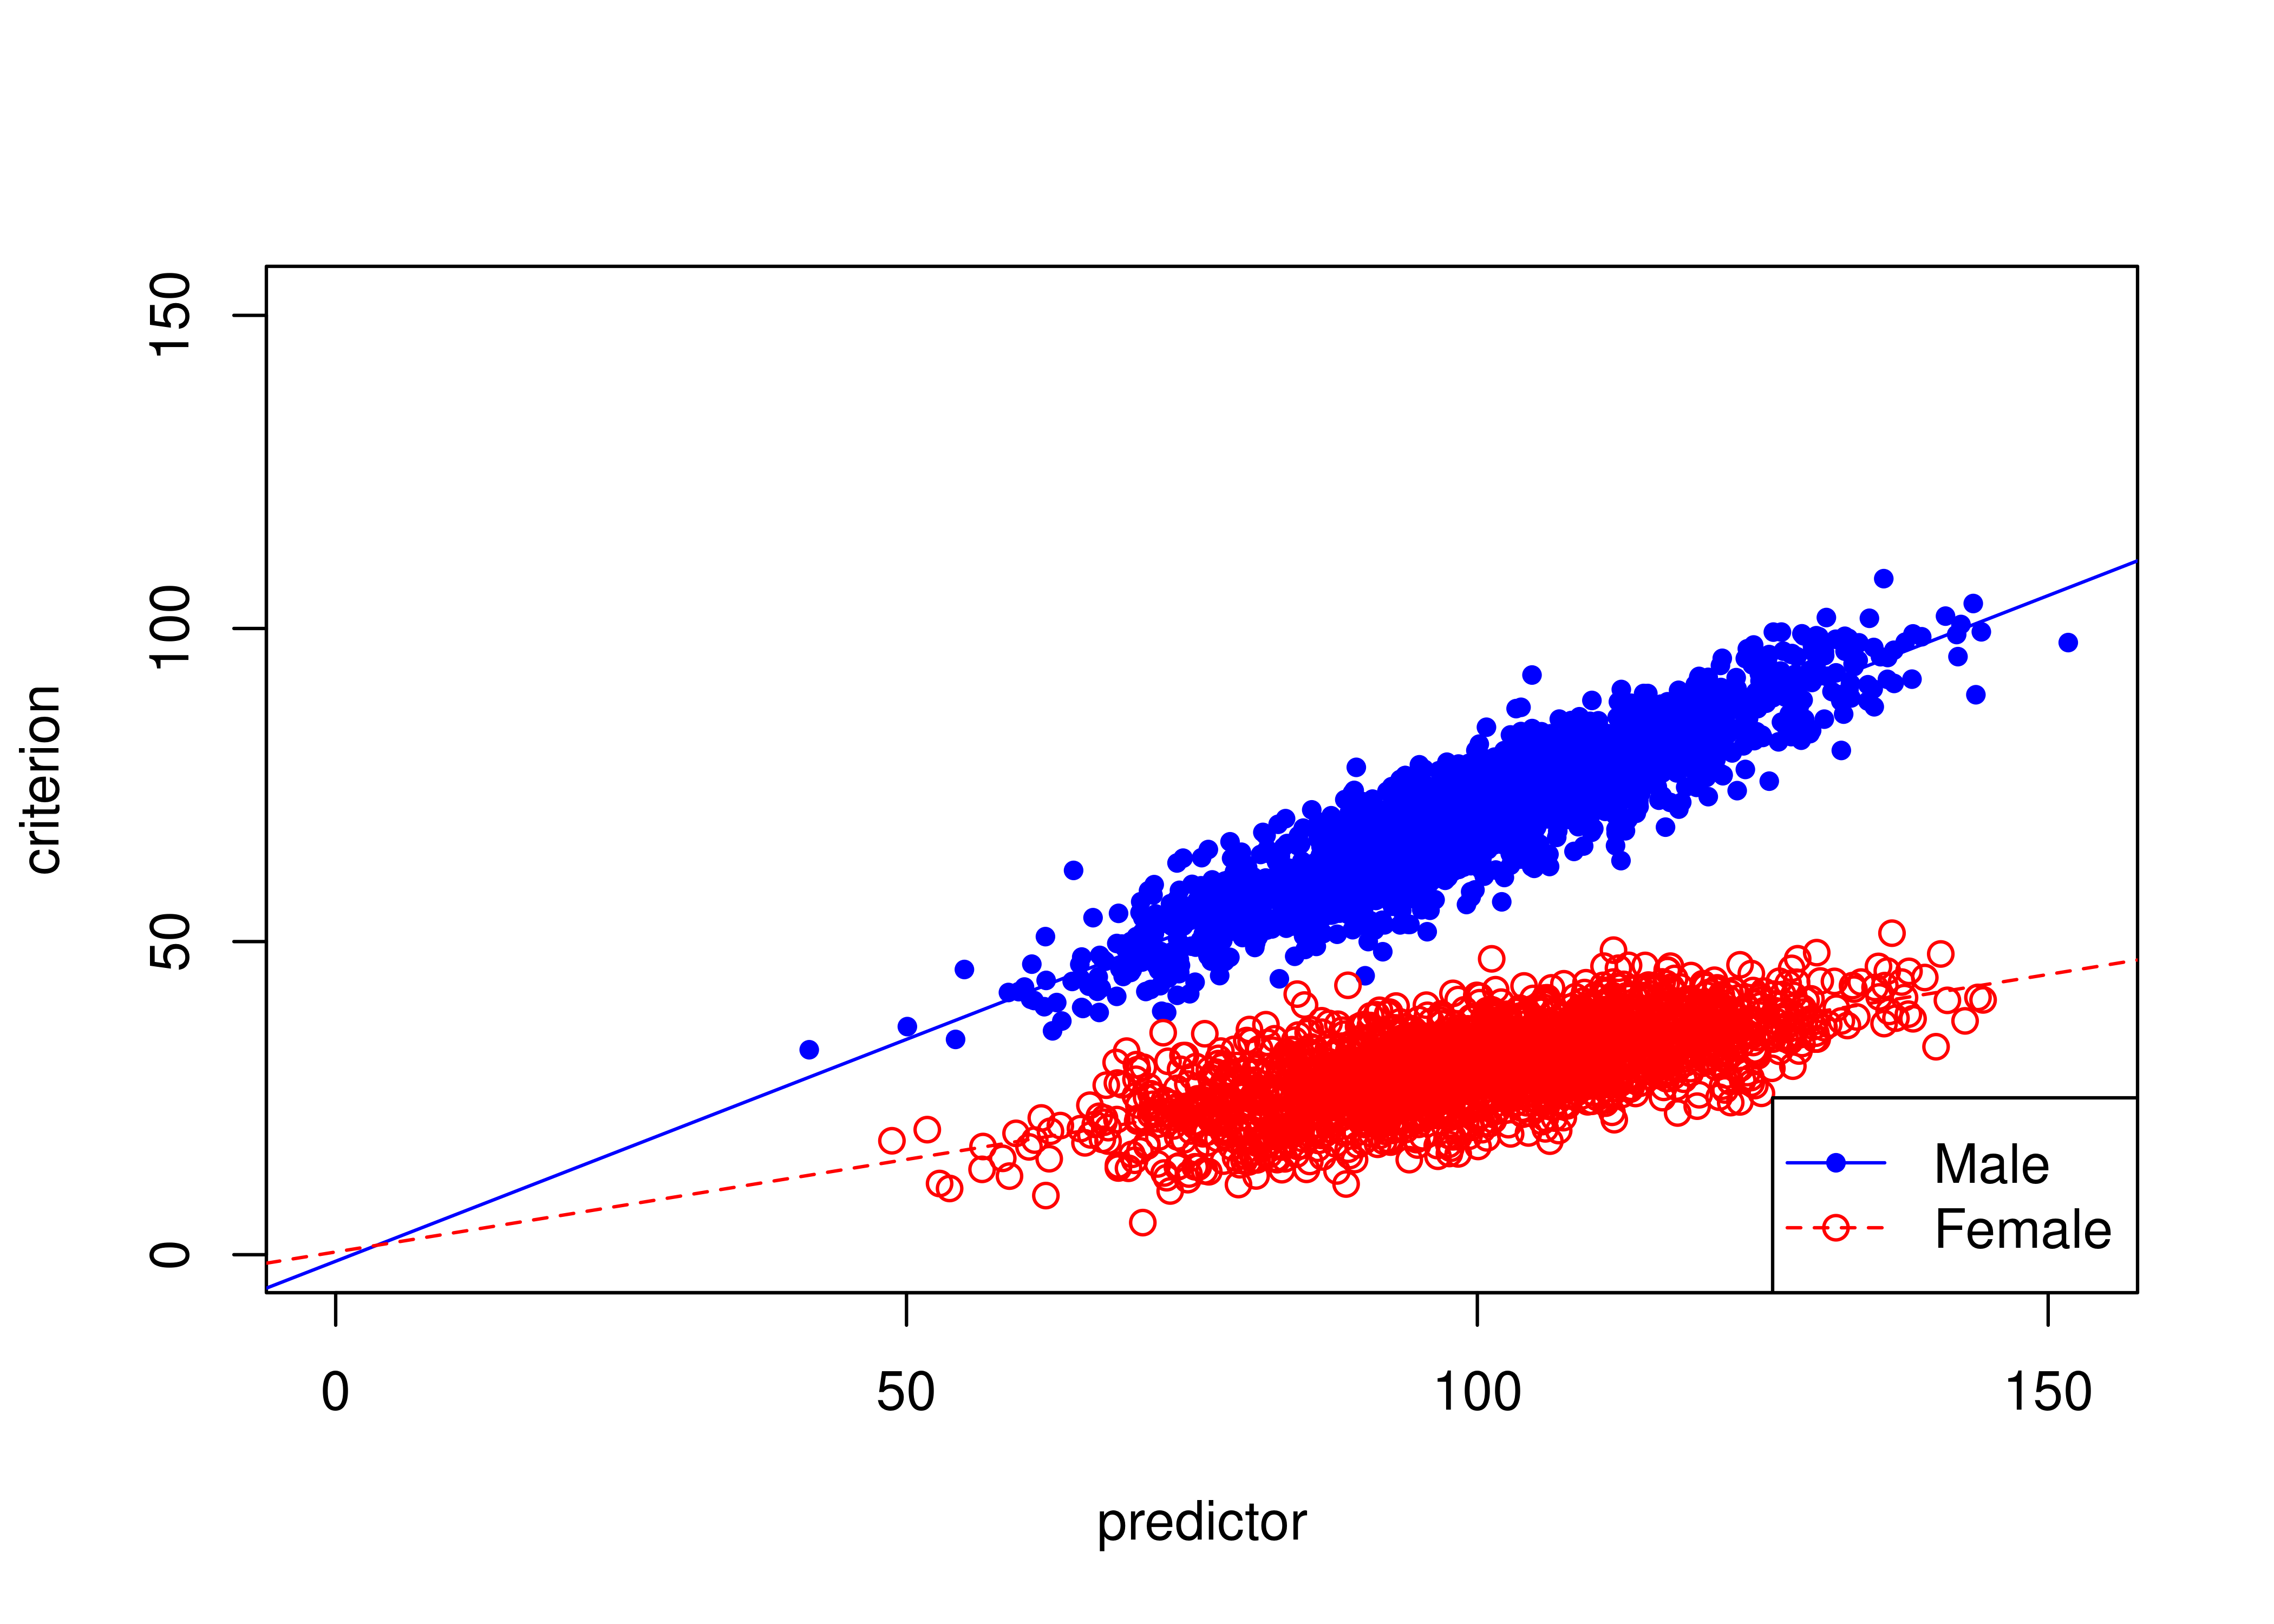 Example of Slope Bias in Prediction (Different Slopes Between Males And Females).